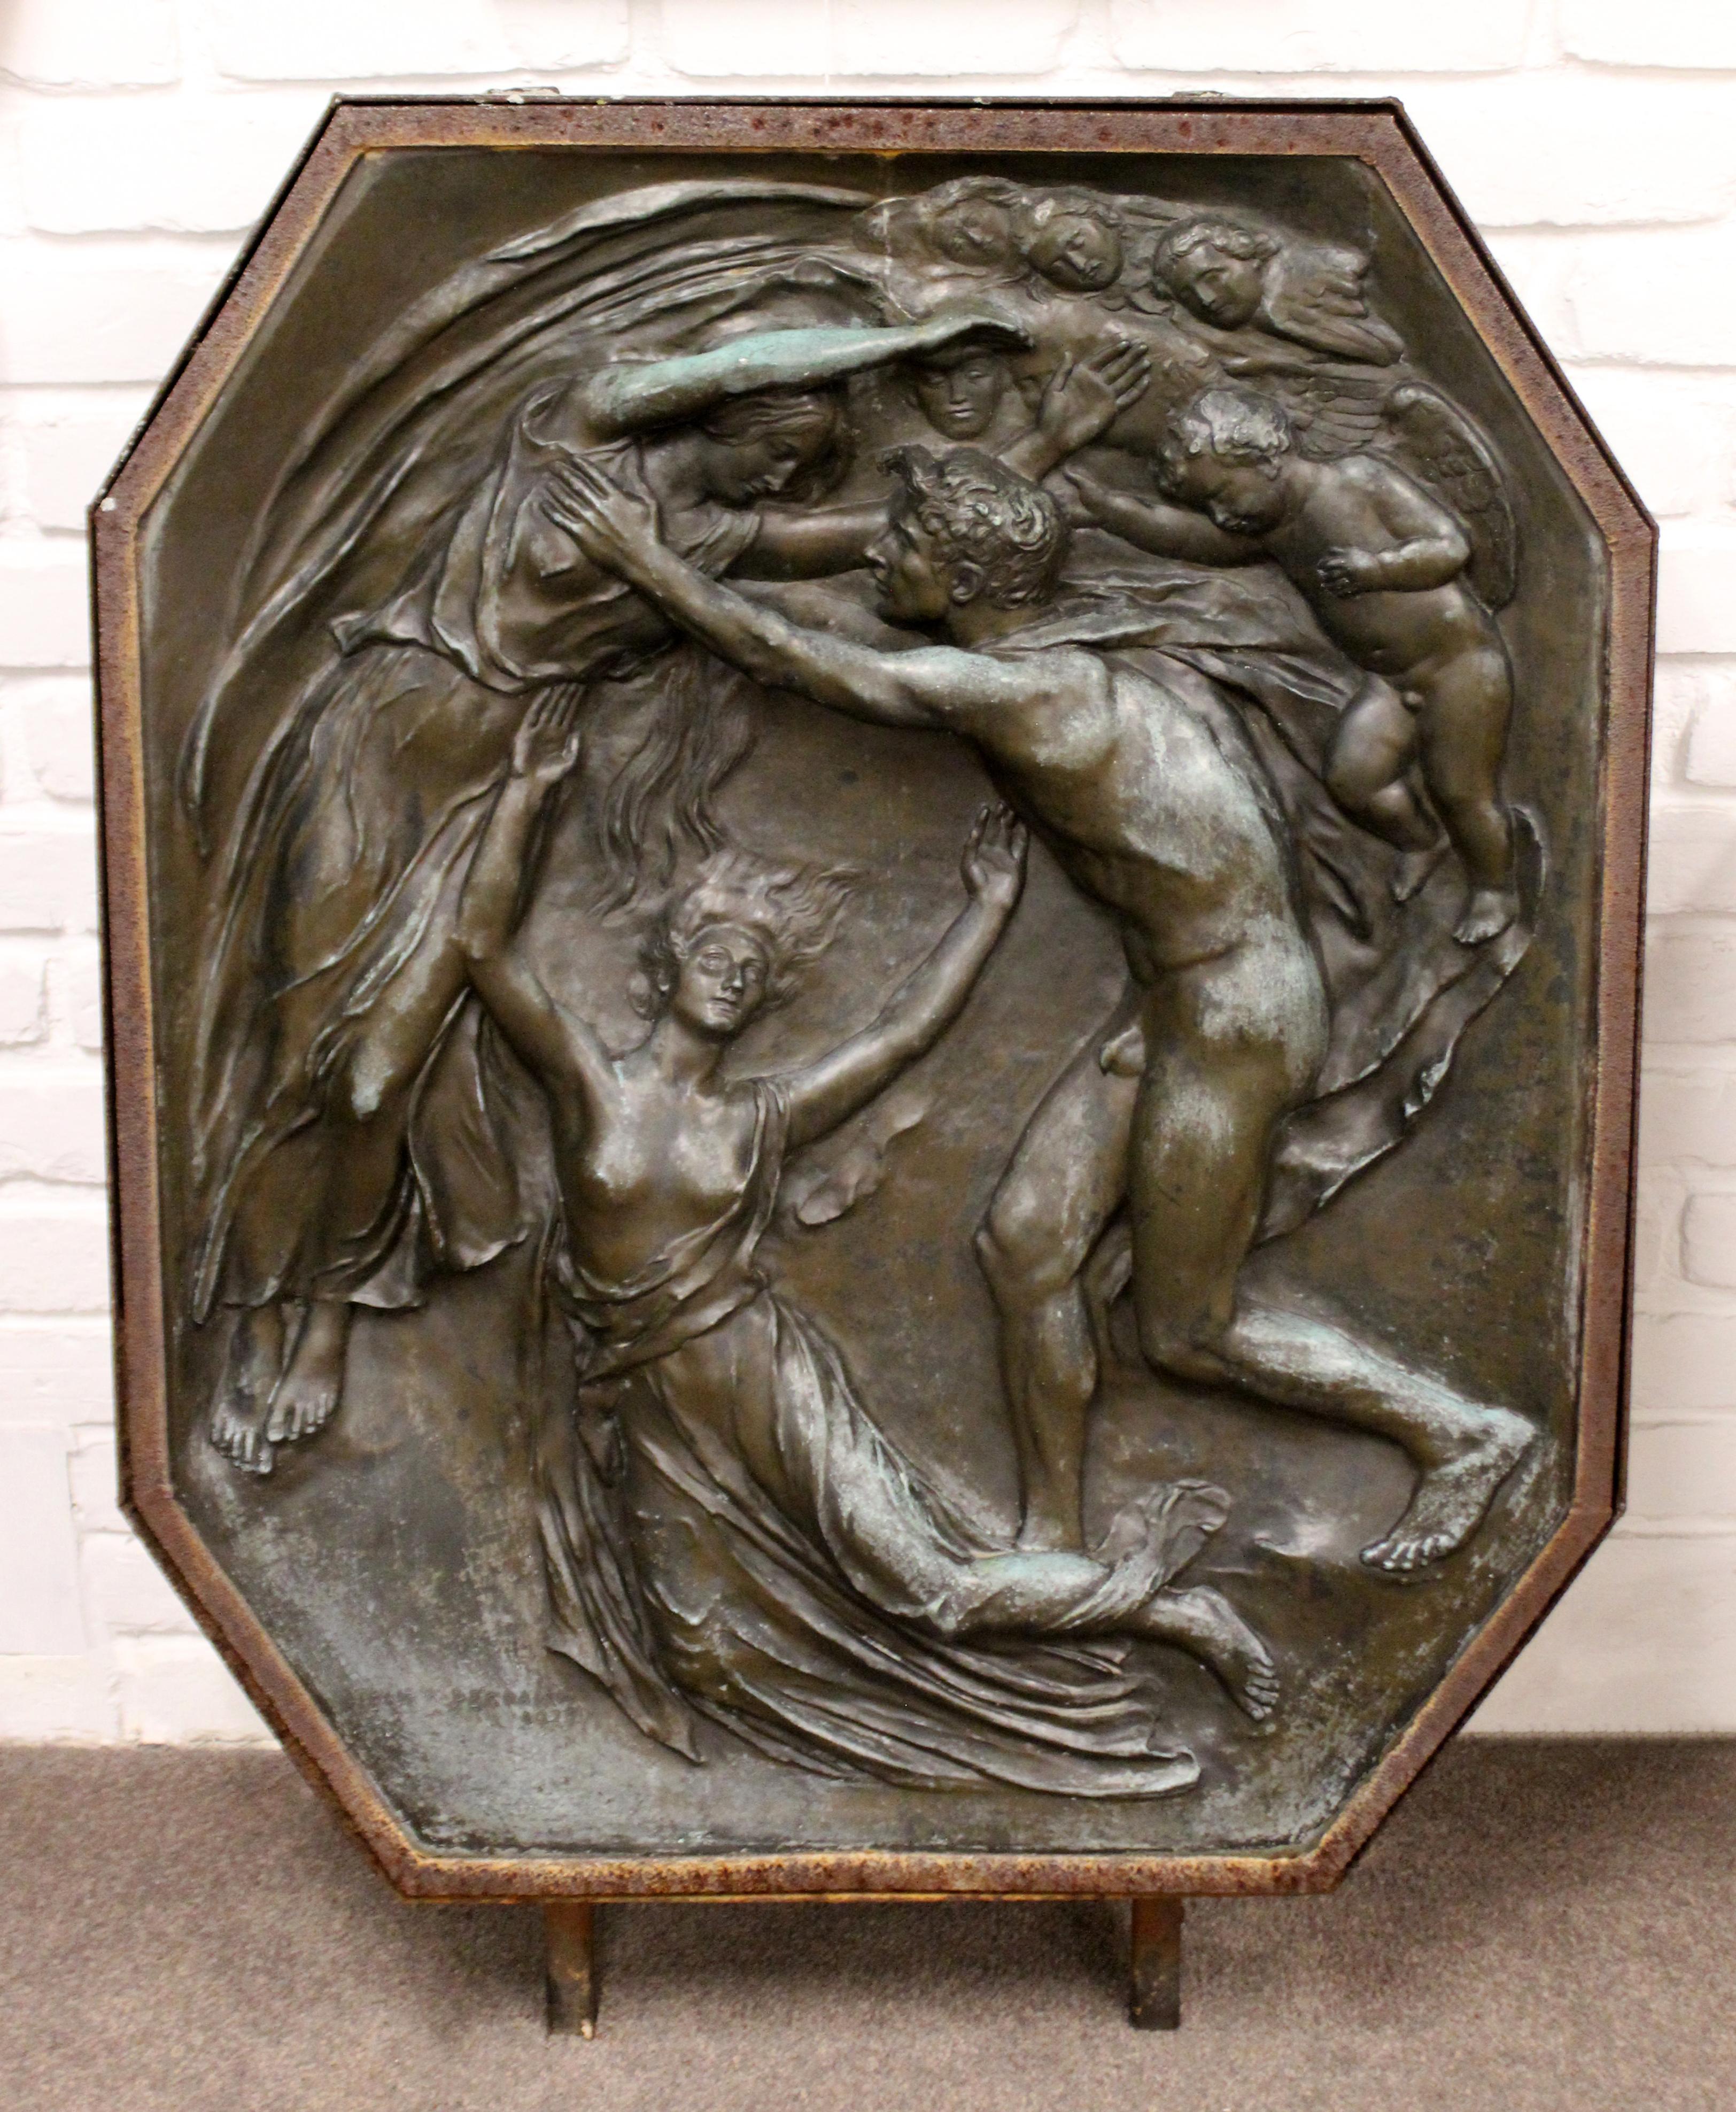 For your consideration is a breathtaking, bronze wall relief of a man and spirit, signed by Henry Pegram, dated 1923. In excellent condition. The dimensions are 30